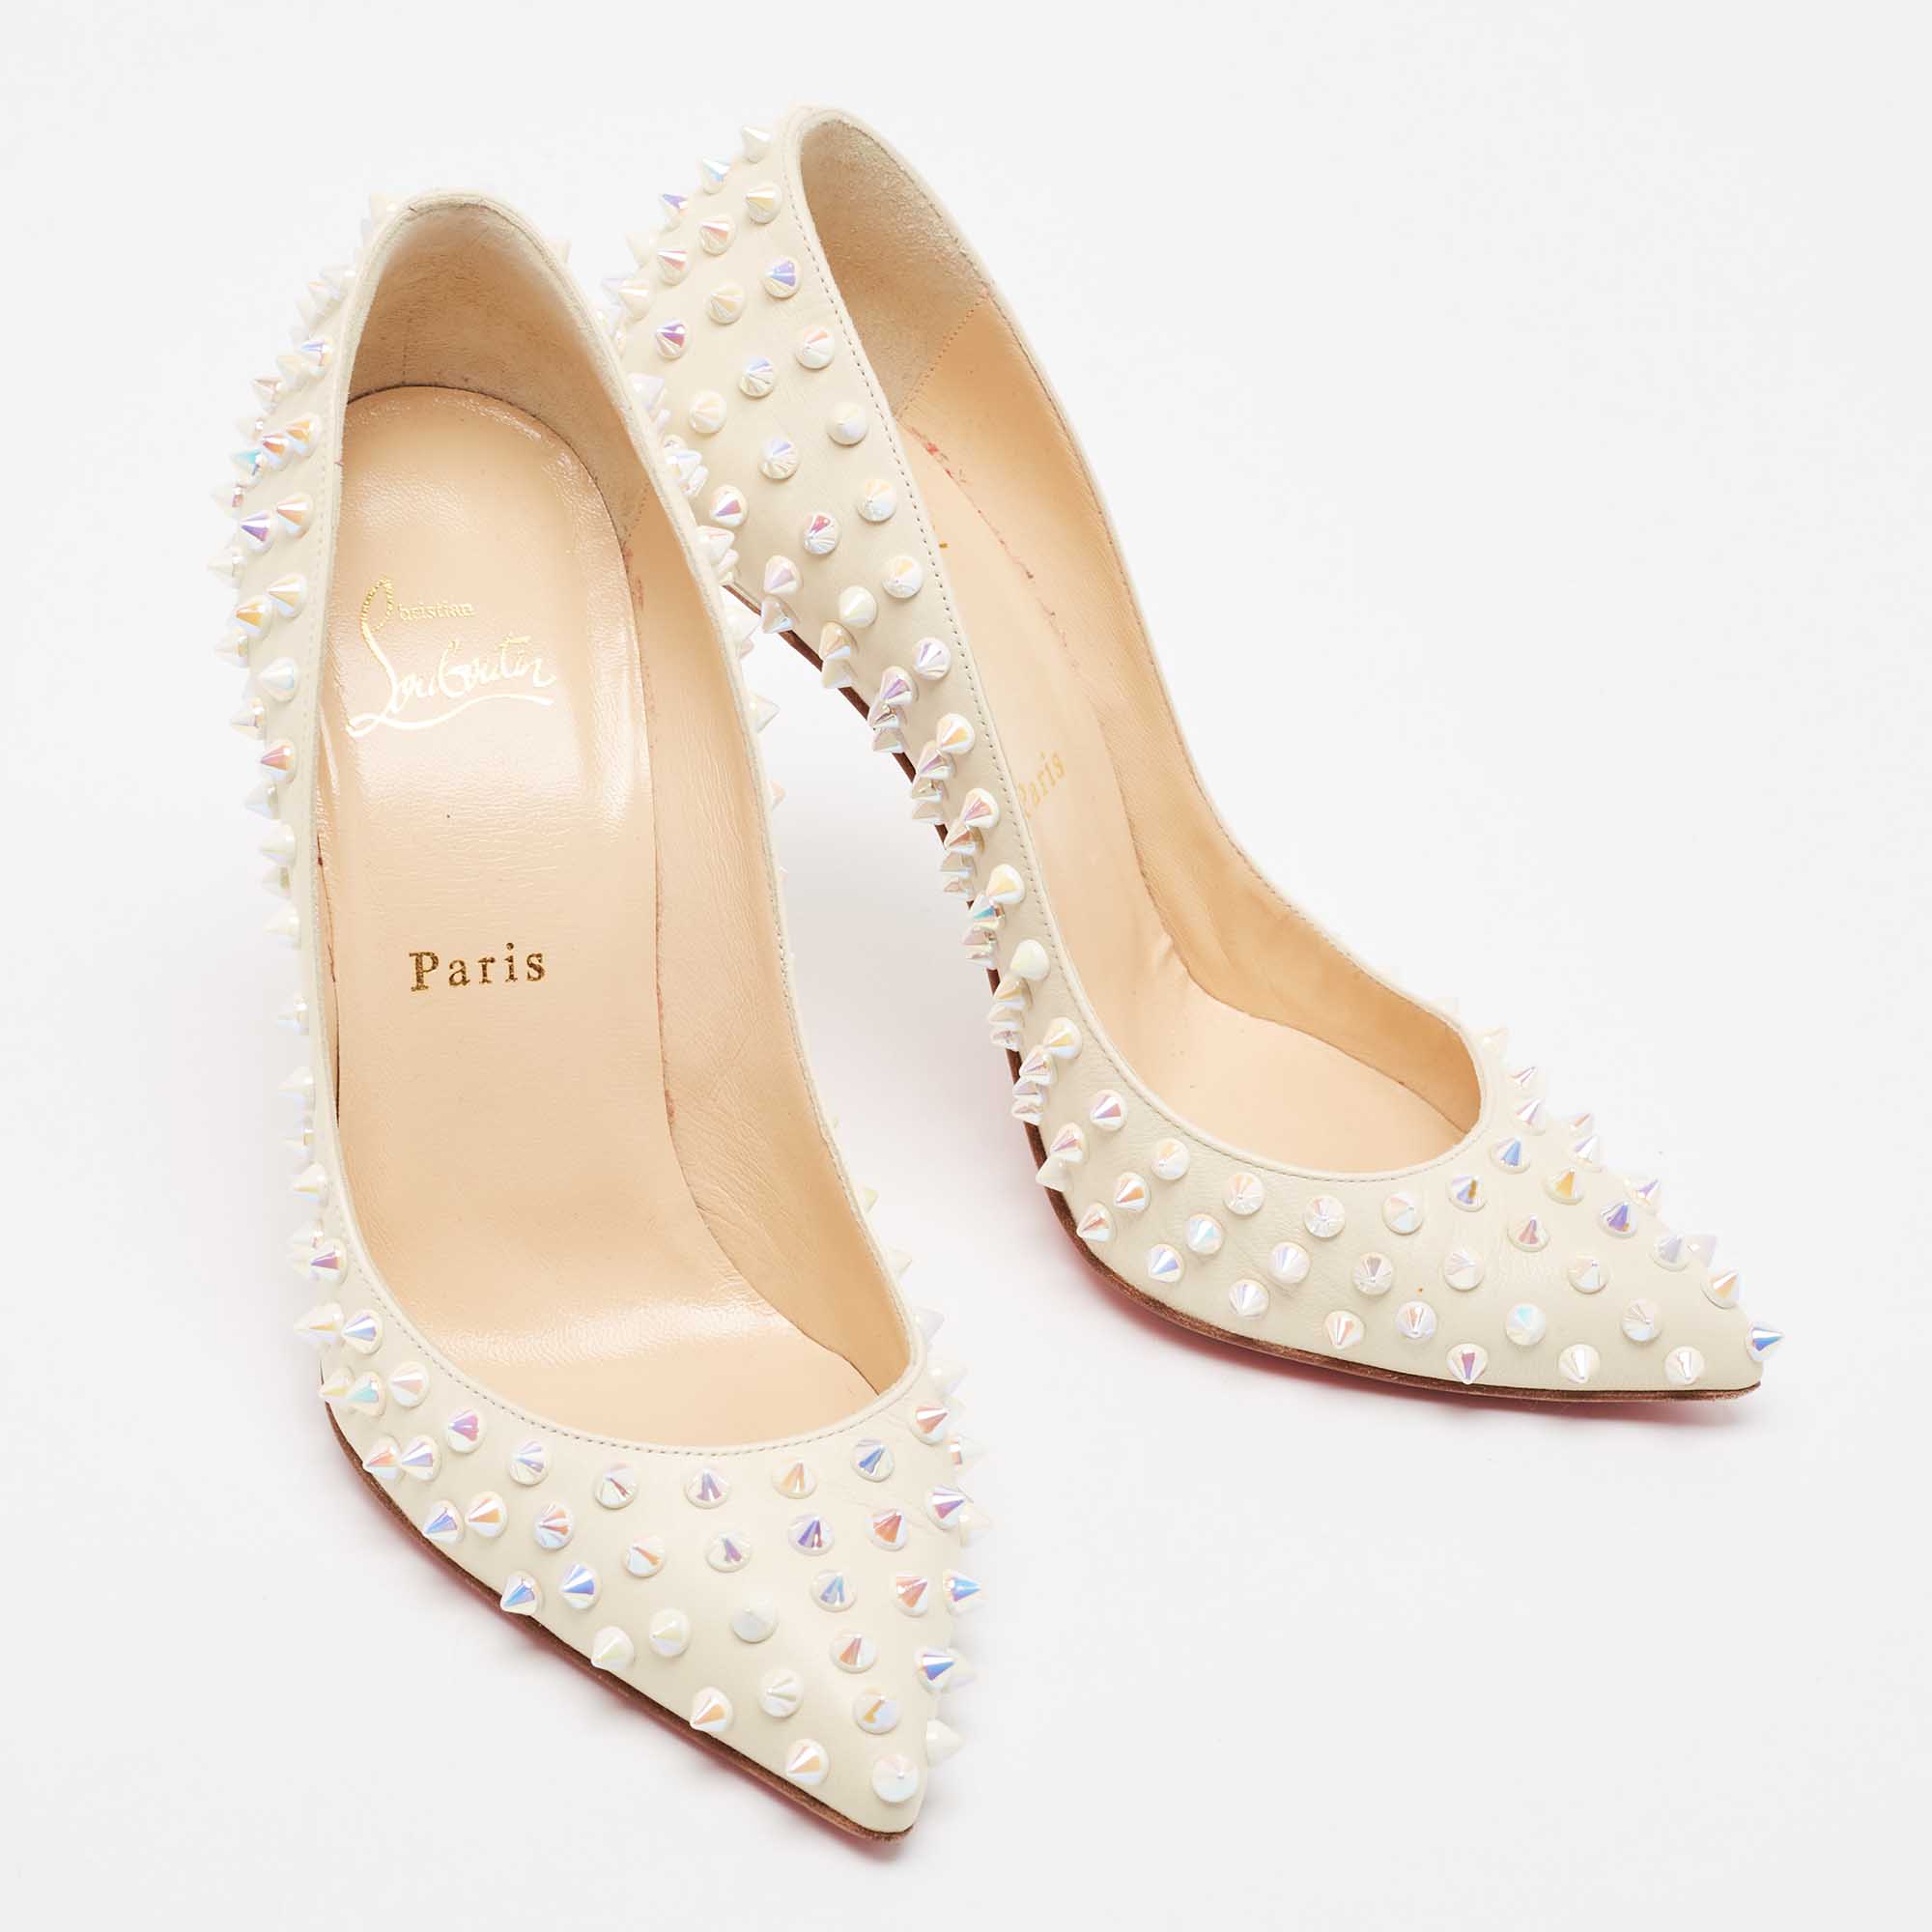 Christian Louboutin Cream Leather Follies Spikes Pointed Toe Pumps Size 38